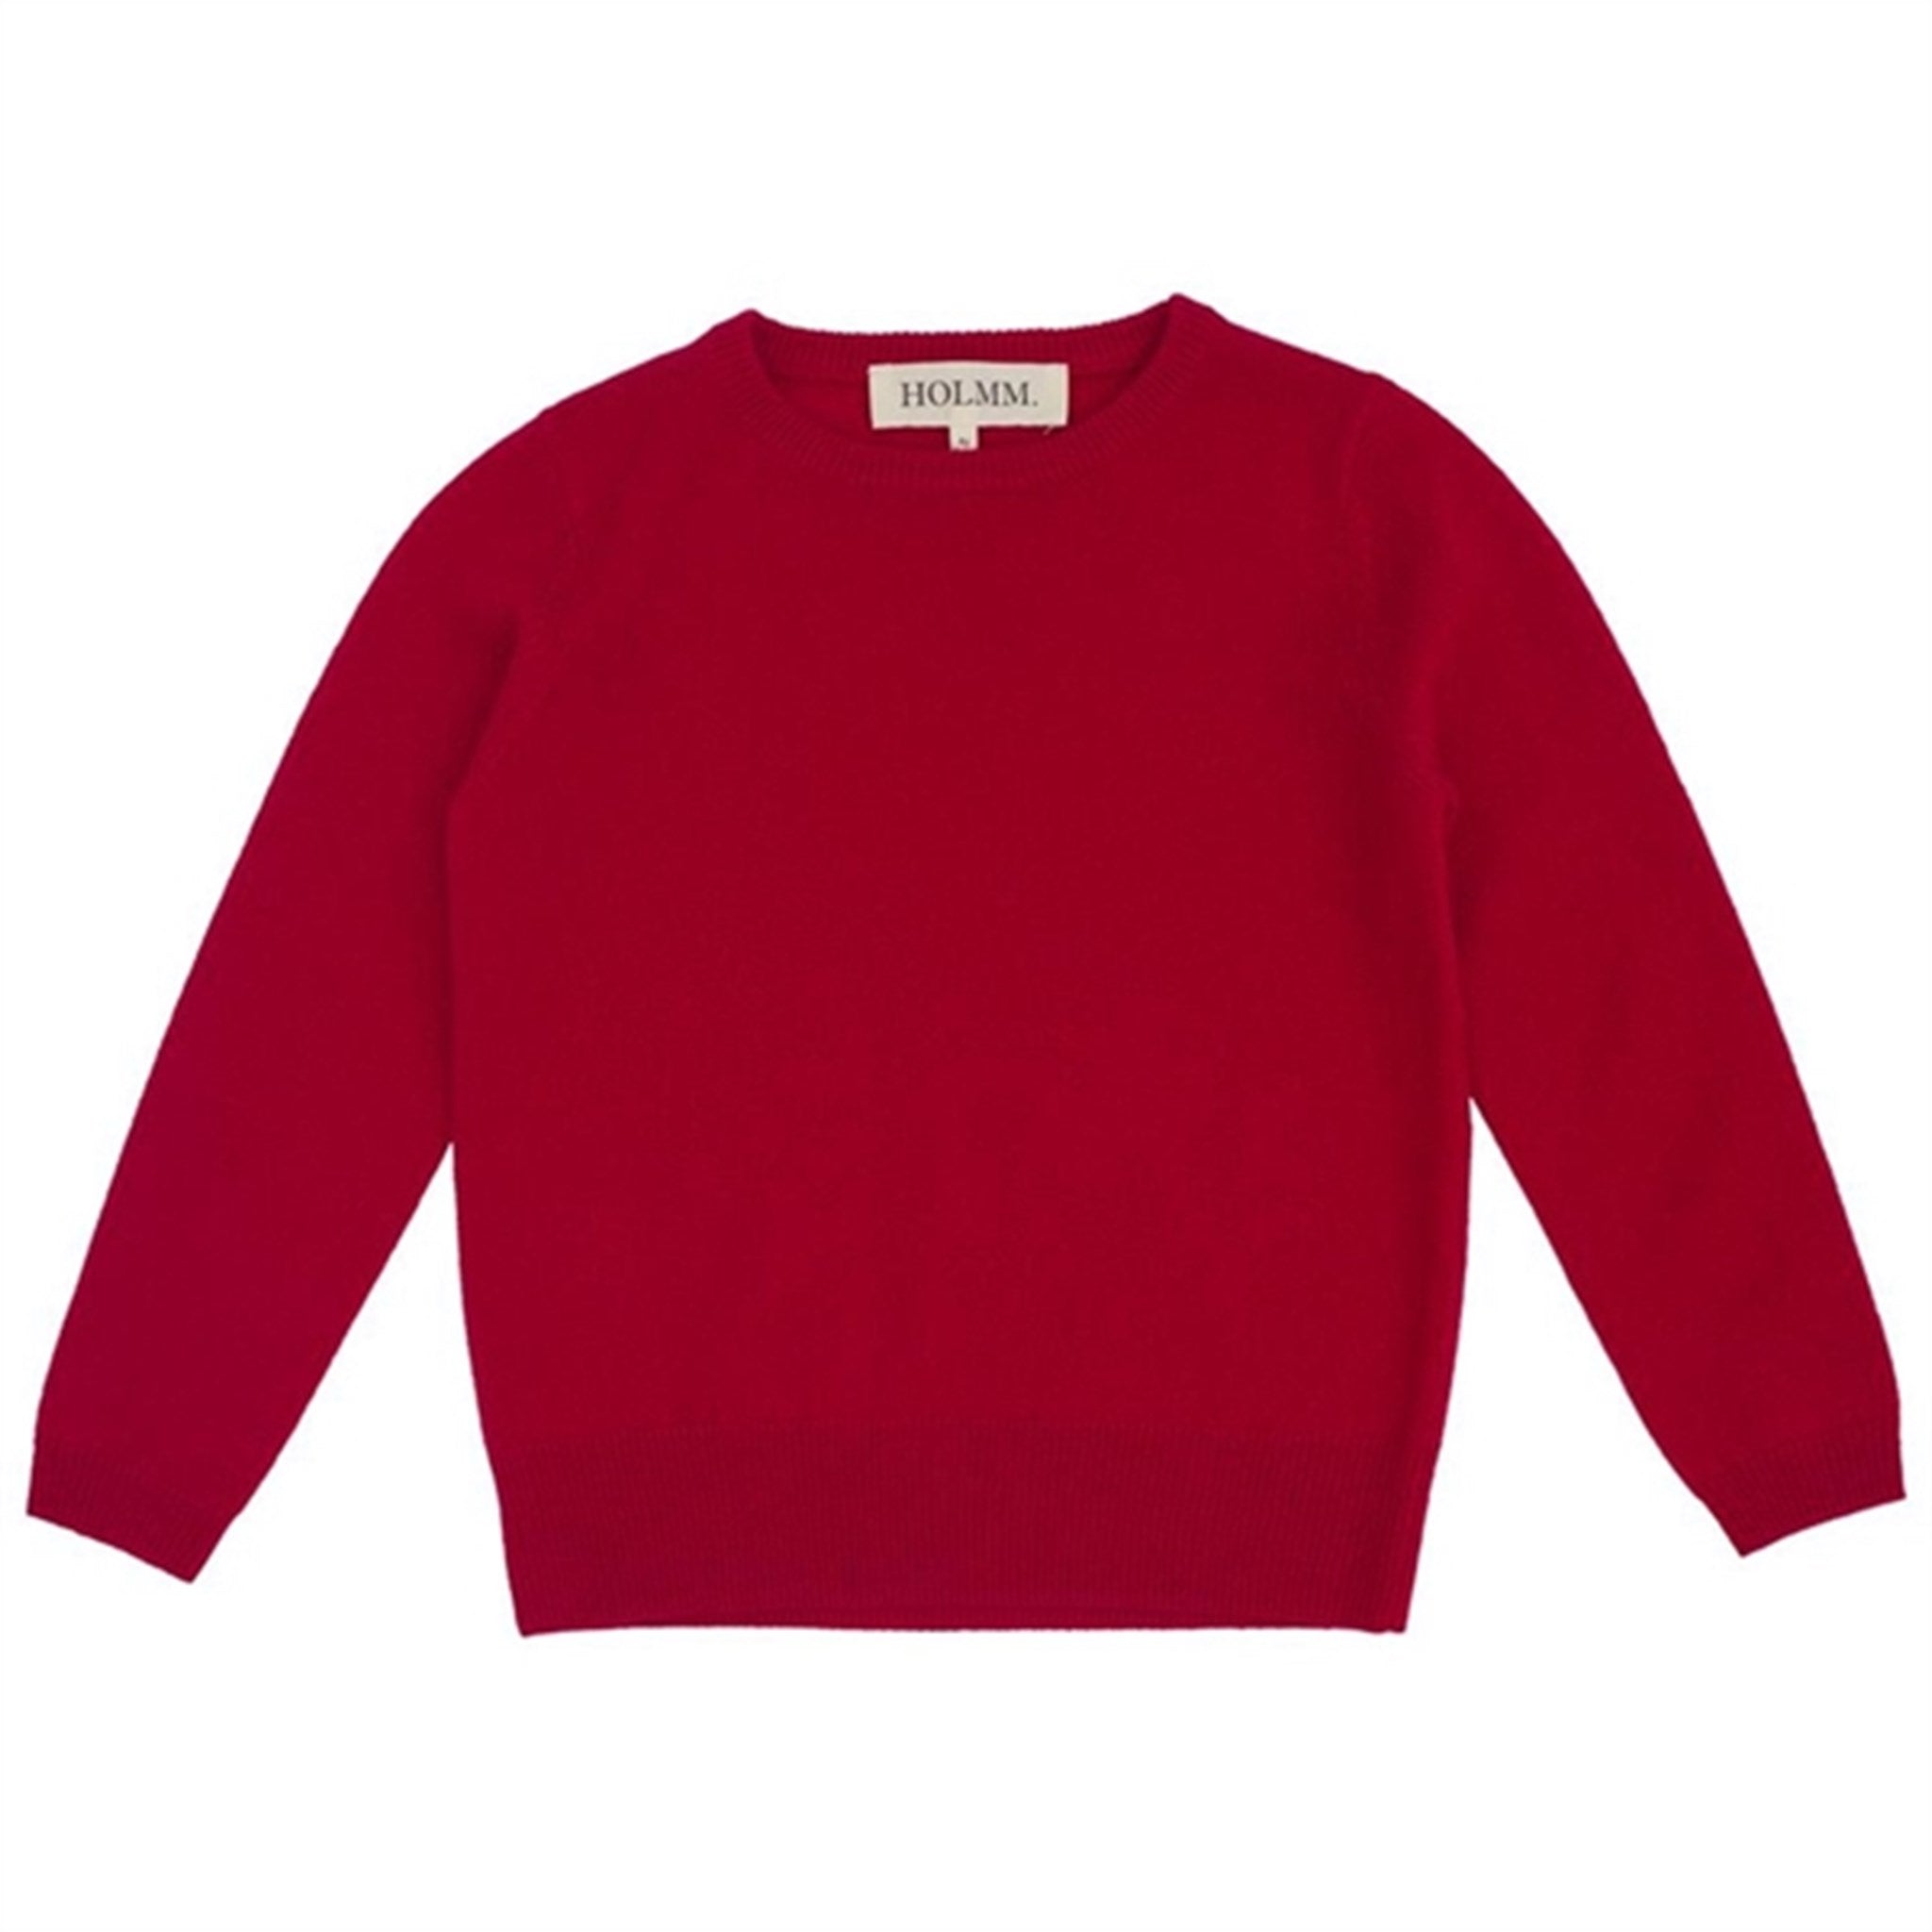 HOLMM Postbox Billy Cashmere Knit Sweater